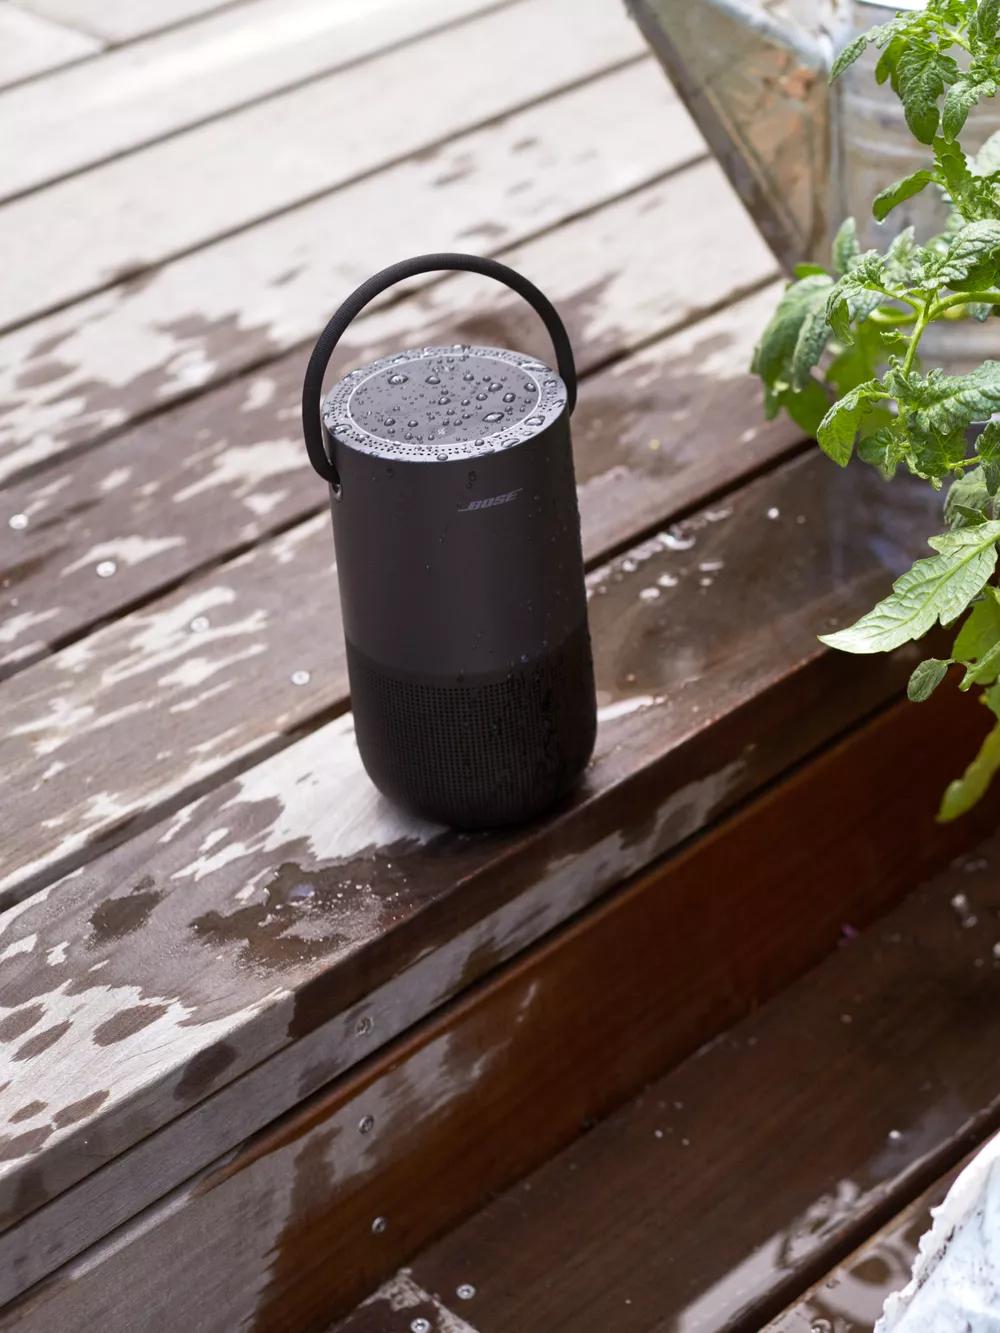 Bose Portable Smart Speaker on a deck next to a tomato plant